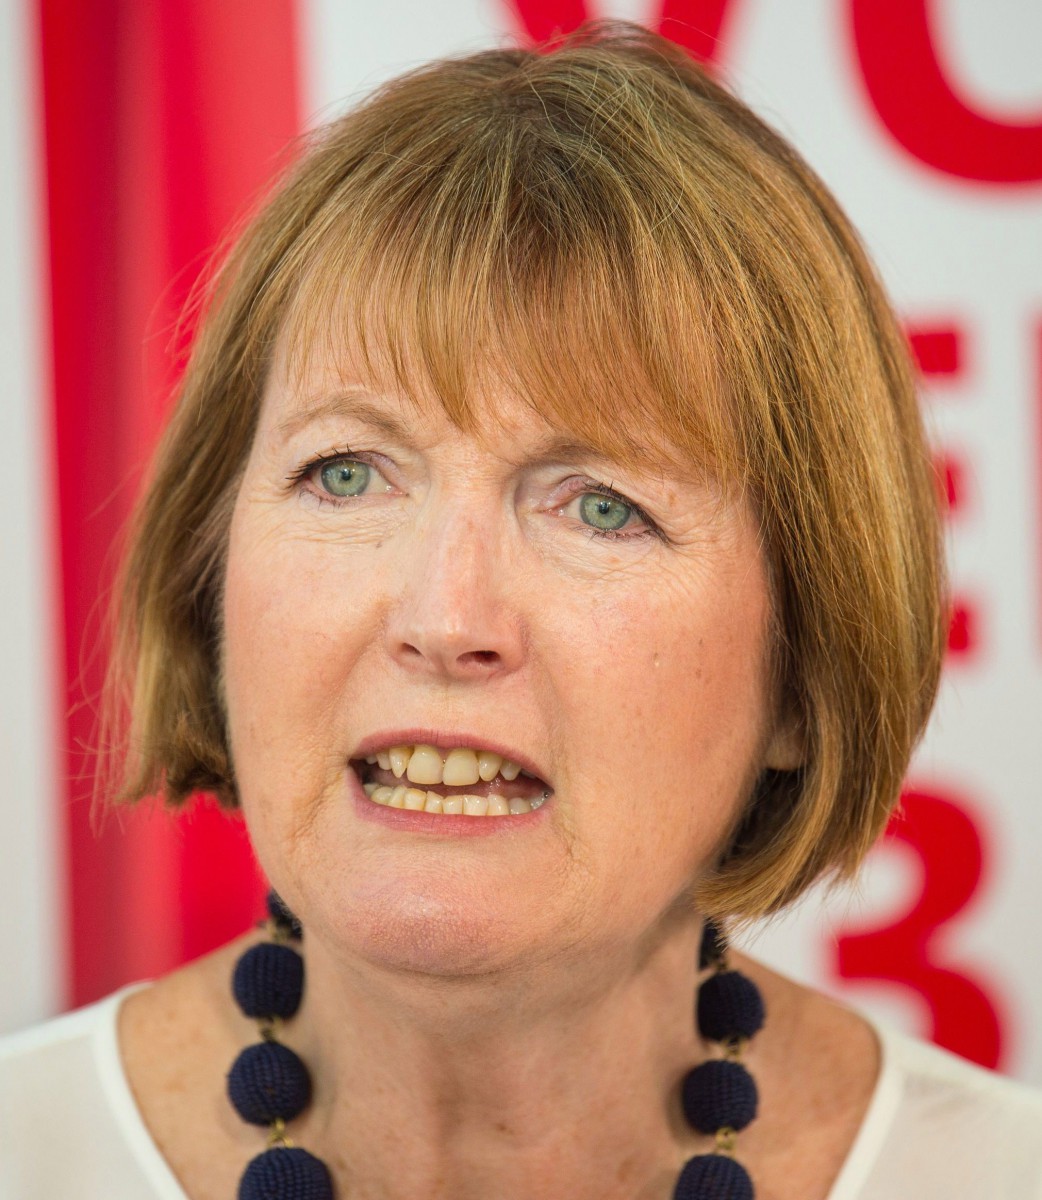 Harriet Harman has been named as one of two candidates to lead a unity government